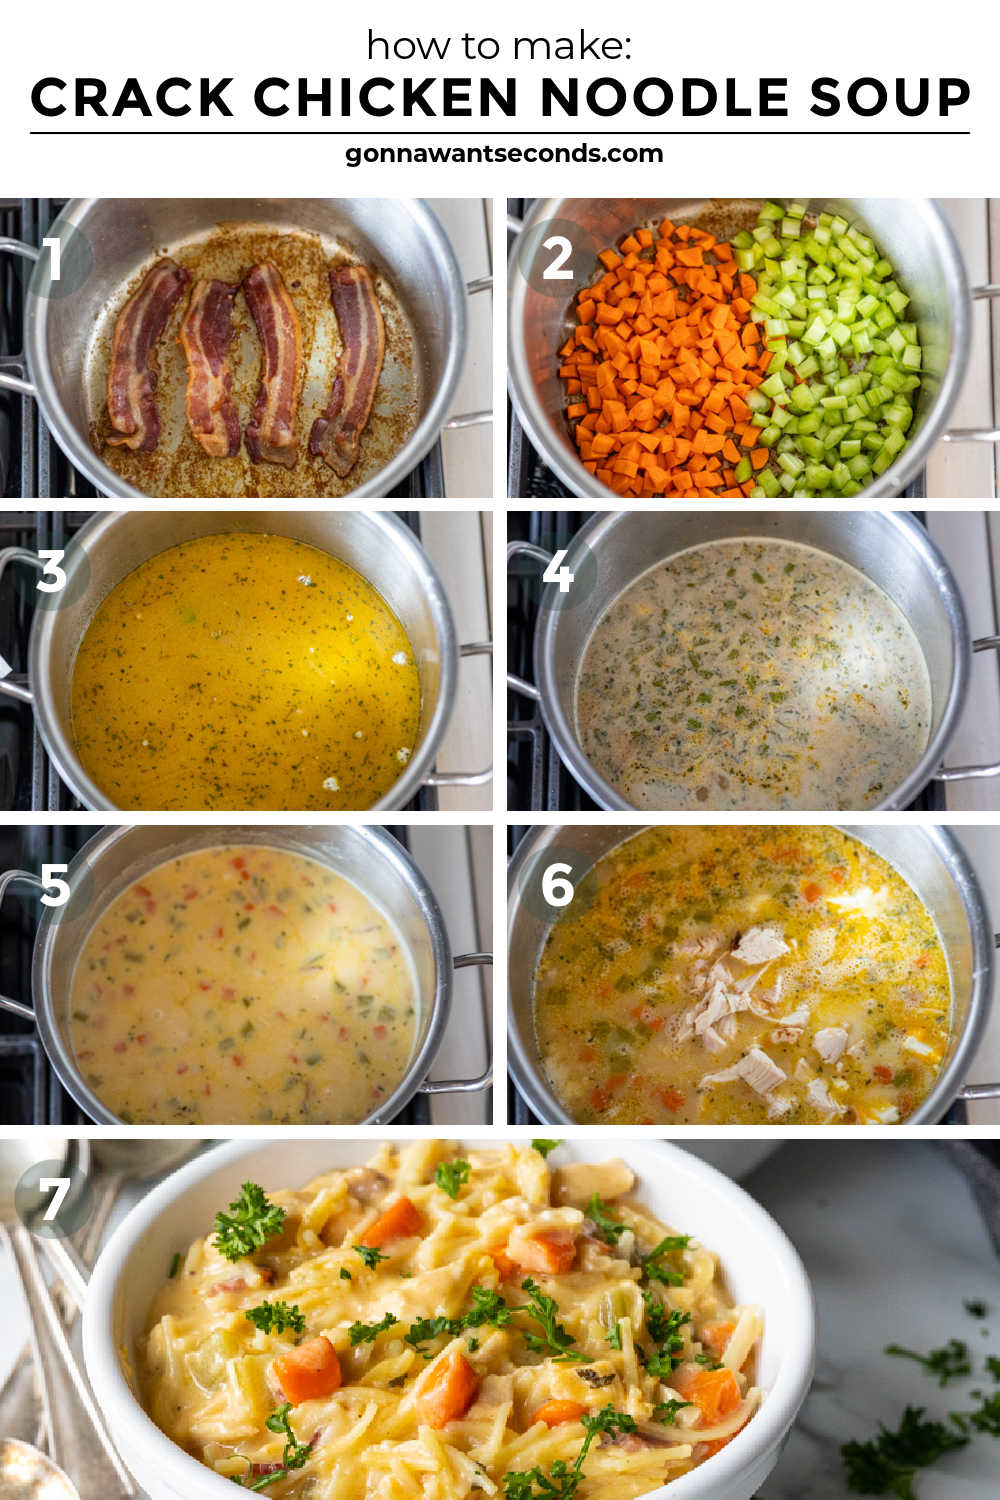 step by step how to make crack chicken noodle soup 